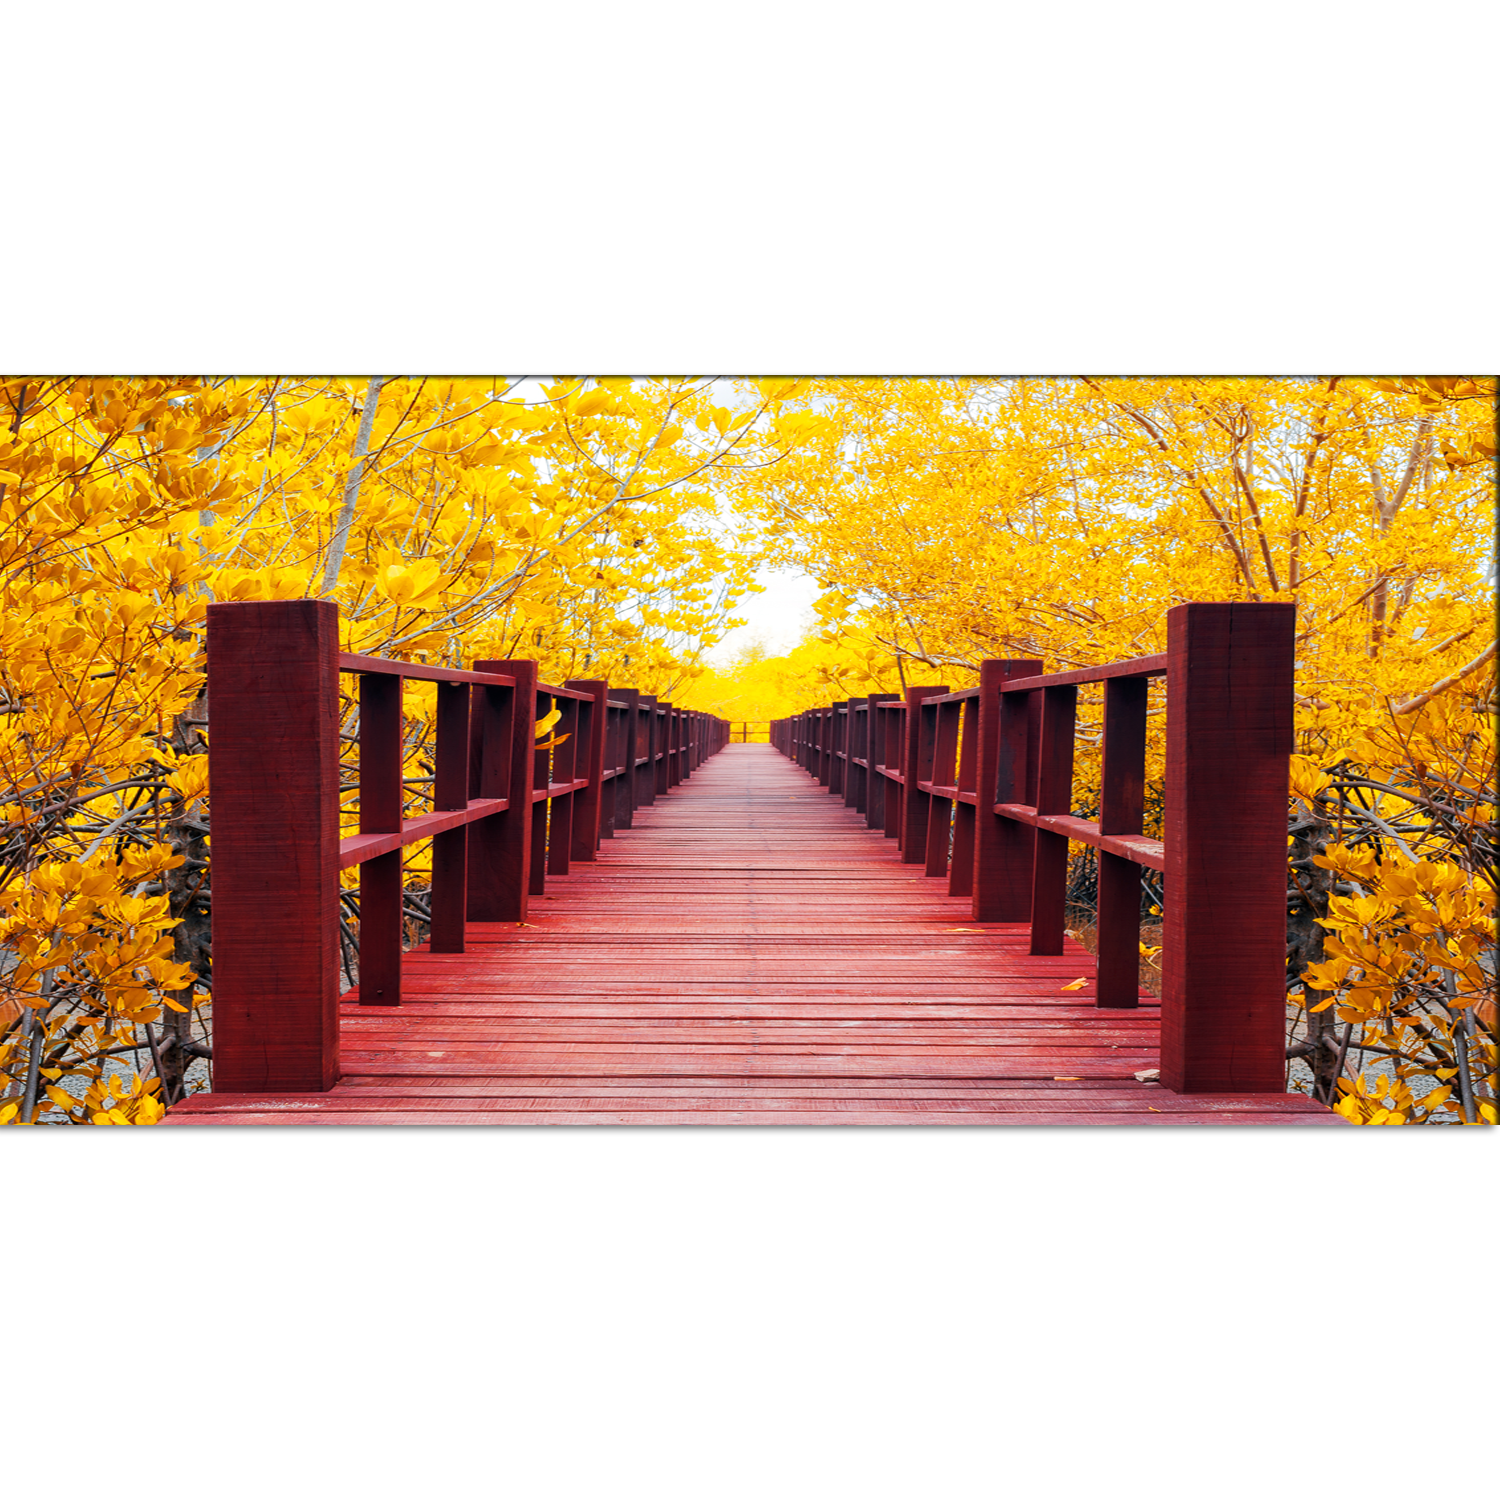 Timber Bridge Forest Canvas Print Wall Painting